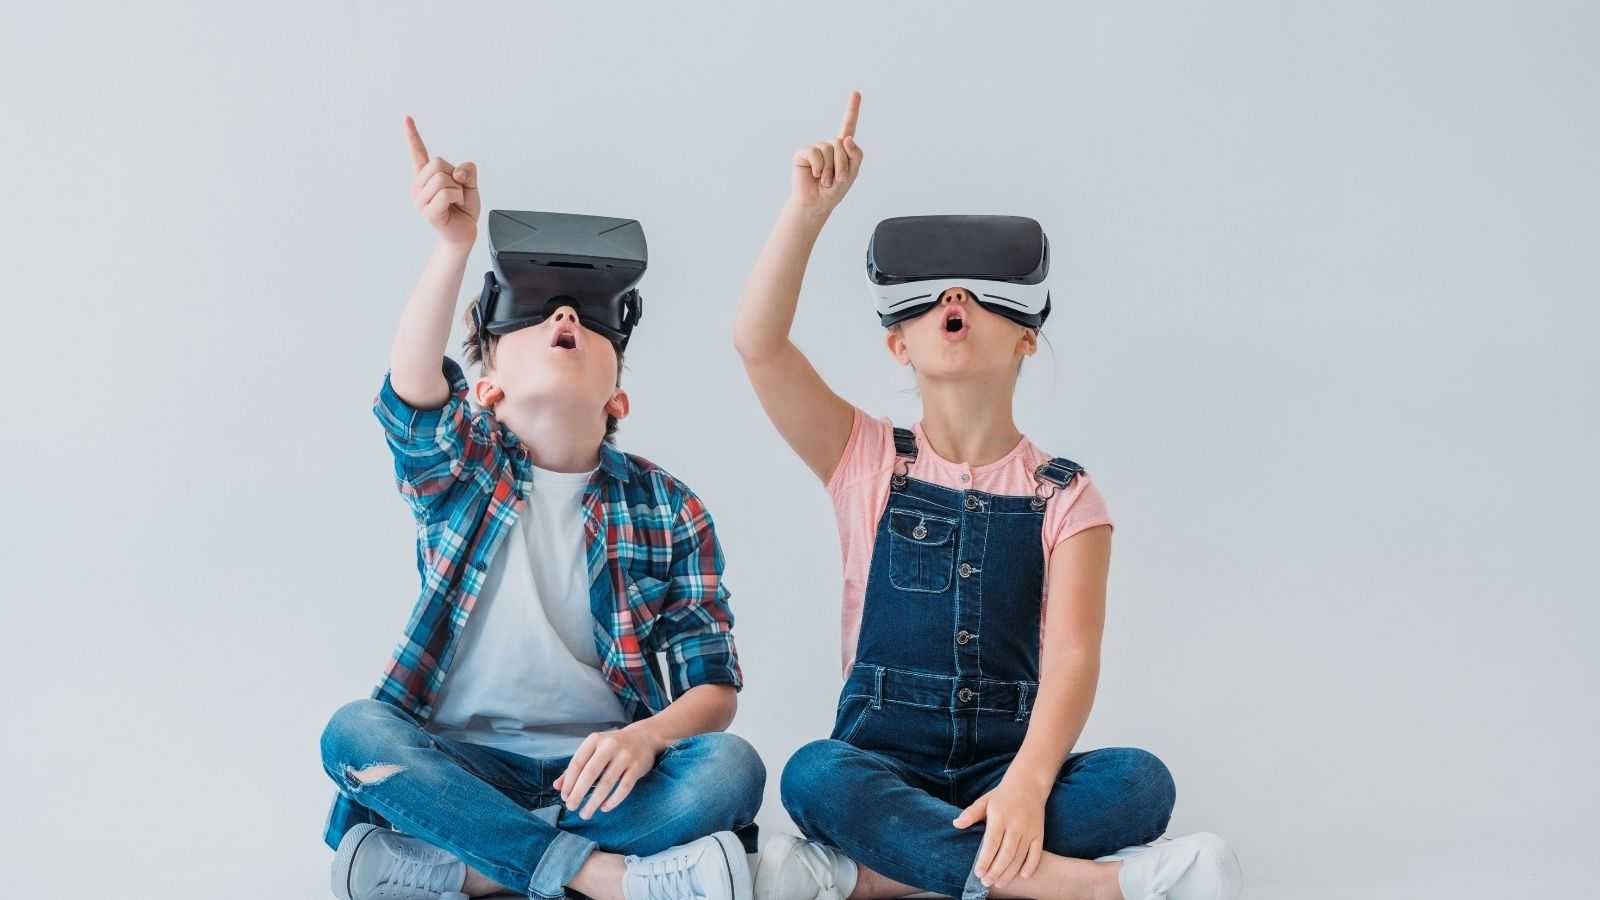 Virtual reality: Time to get real?